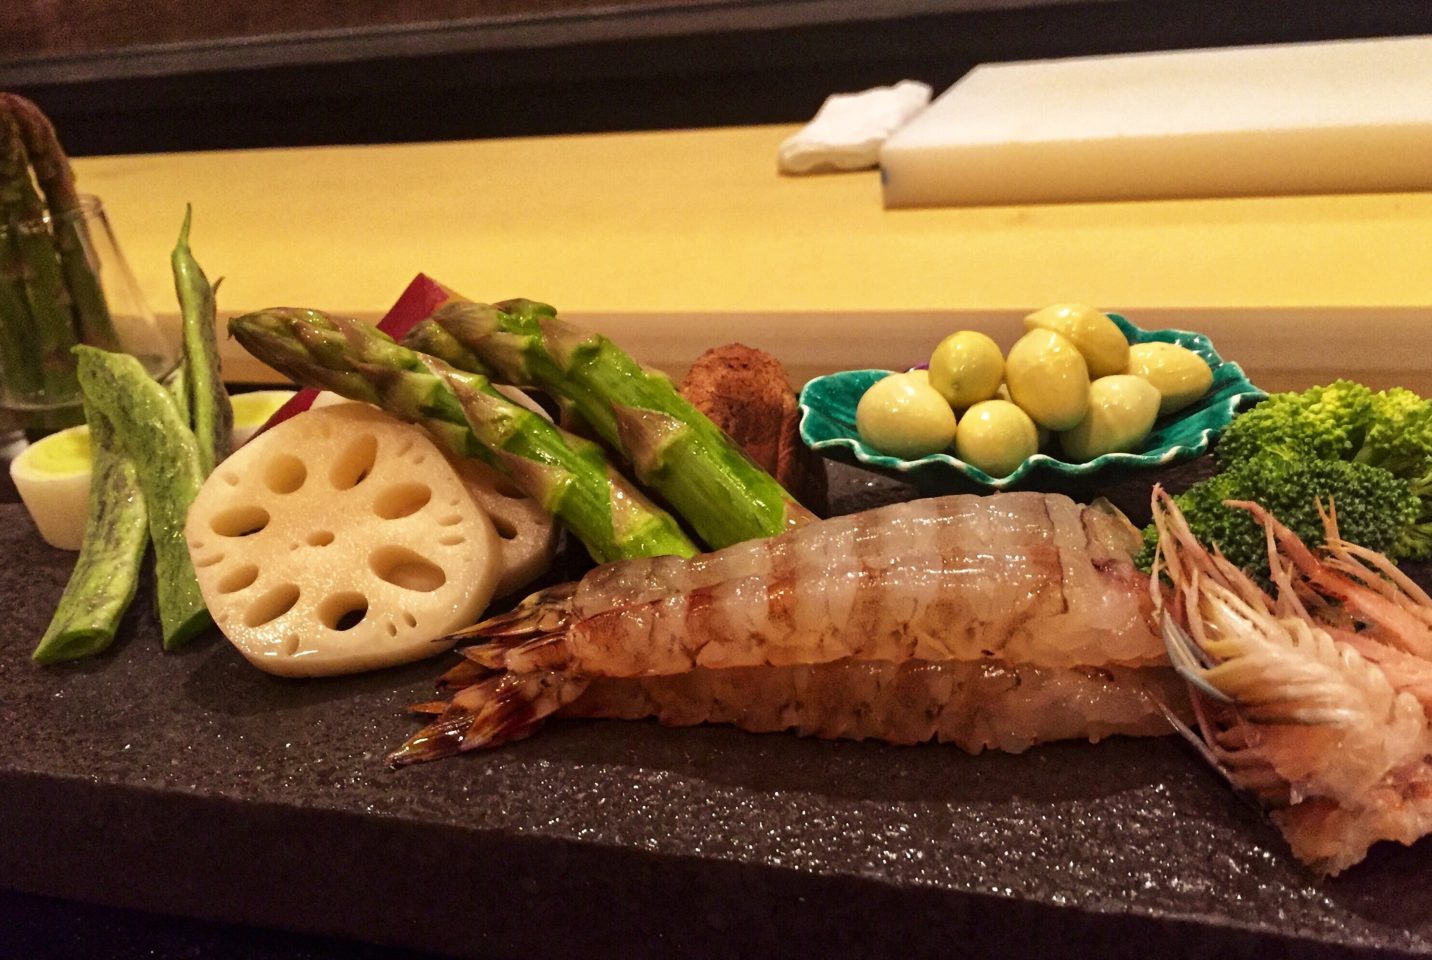 Japan Culinary Experiences ~ Presentation of the fresh ingredients to be dipped in the airy batter and deep fried in a light and fragrant oil for our Tempura dinner at the Hanagatami Restaurant in Osaka